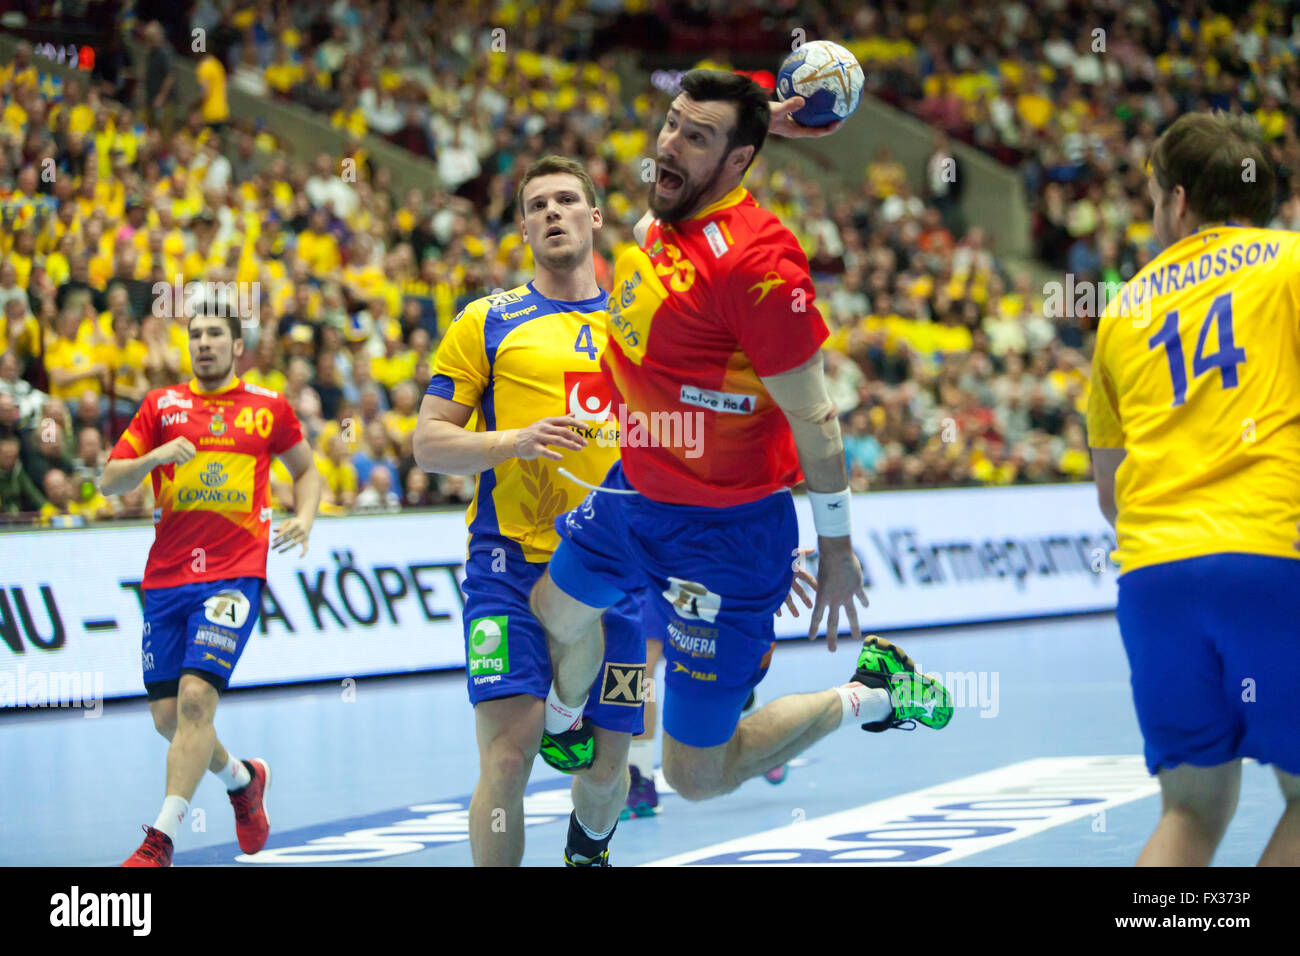 Malmö, Sweden, April 10th, 2016. Gedeón Guardiola (30) of Spain in action during the IHF 2016 Men’s Olympic Qualification Tournament between Spain and Sweden in Malmö Arena.  Spain won the match 25 – 23, but Sweden qualified for Olympic Games participation while Spain for the first time in 40 years did not qualify. Credit:  OJPHOTOS/Alamy Live News Stock Photo